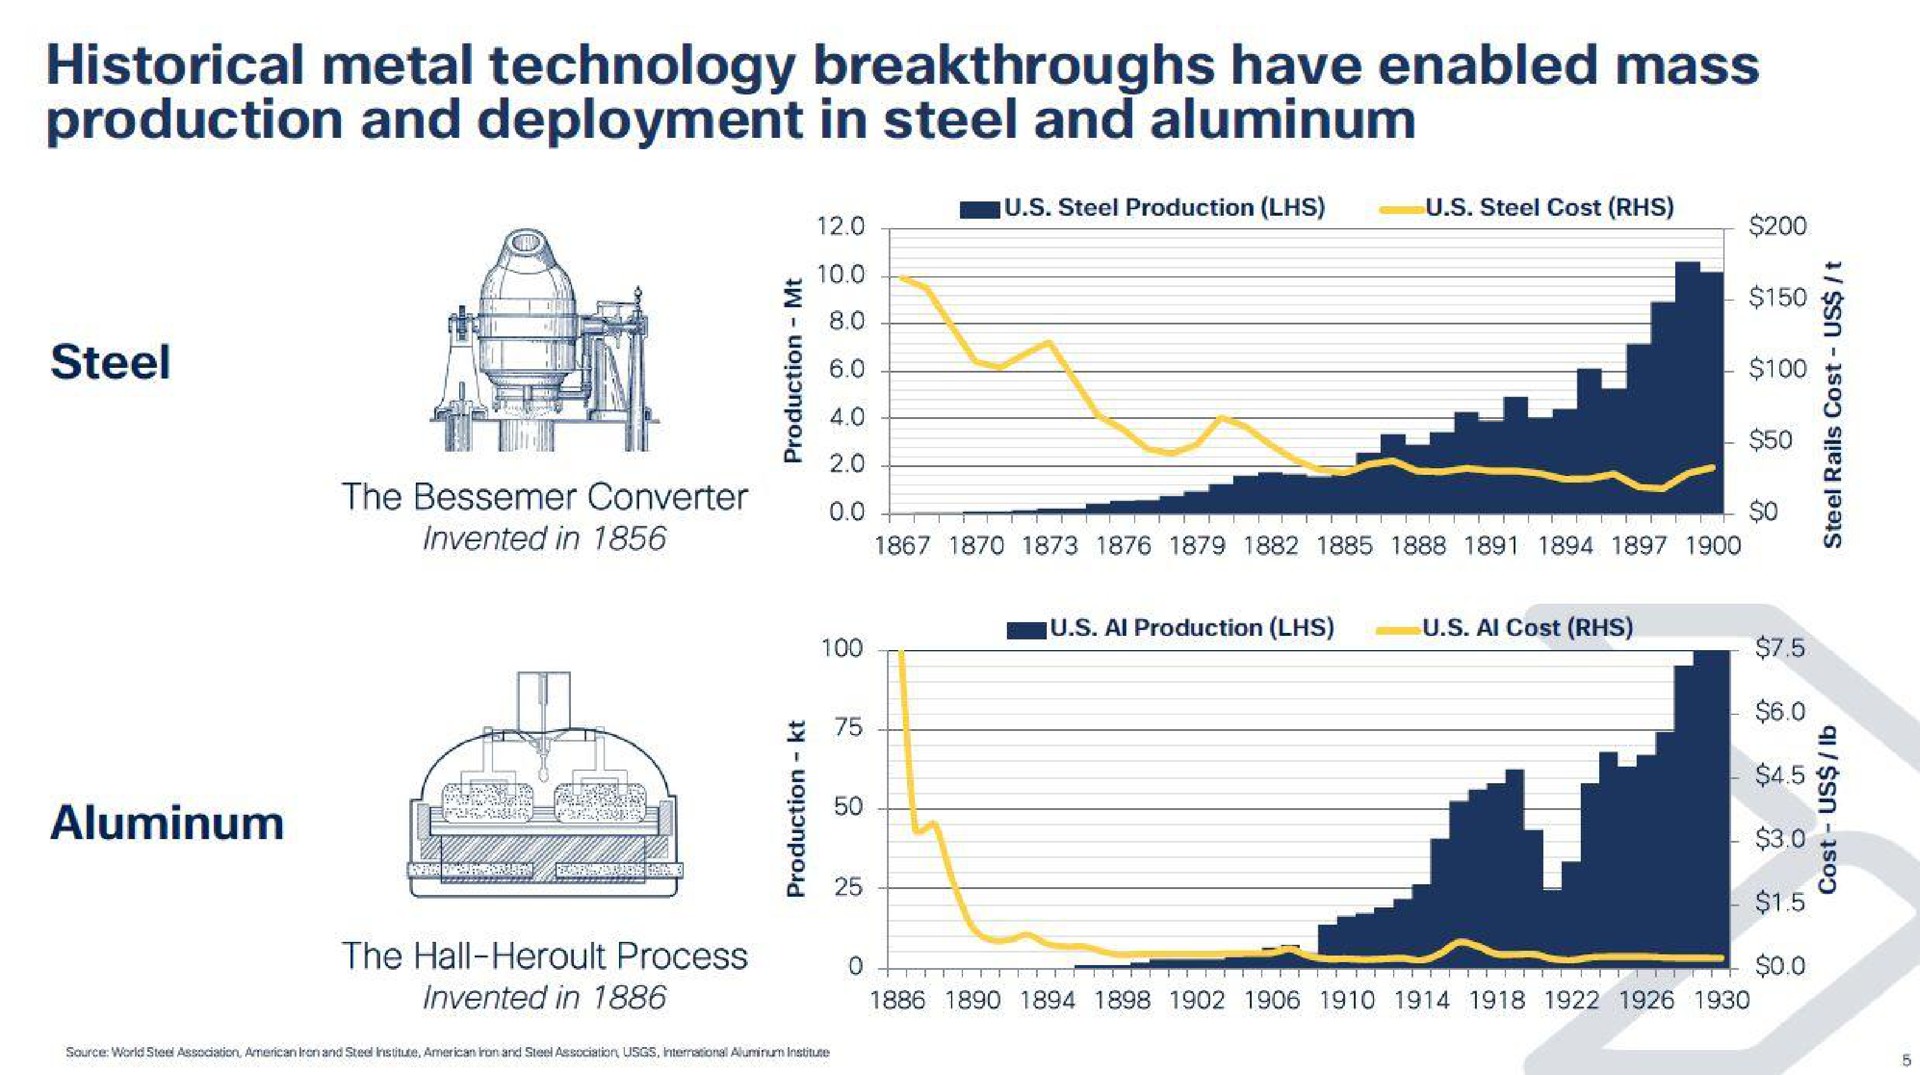 historical metal technology breakthroughs have enabled mass production and deployment in steel and aluminum | IperionX